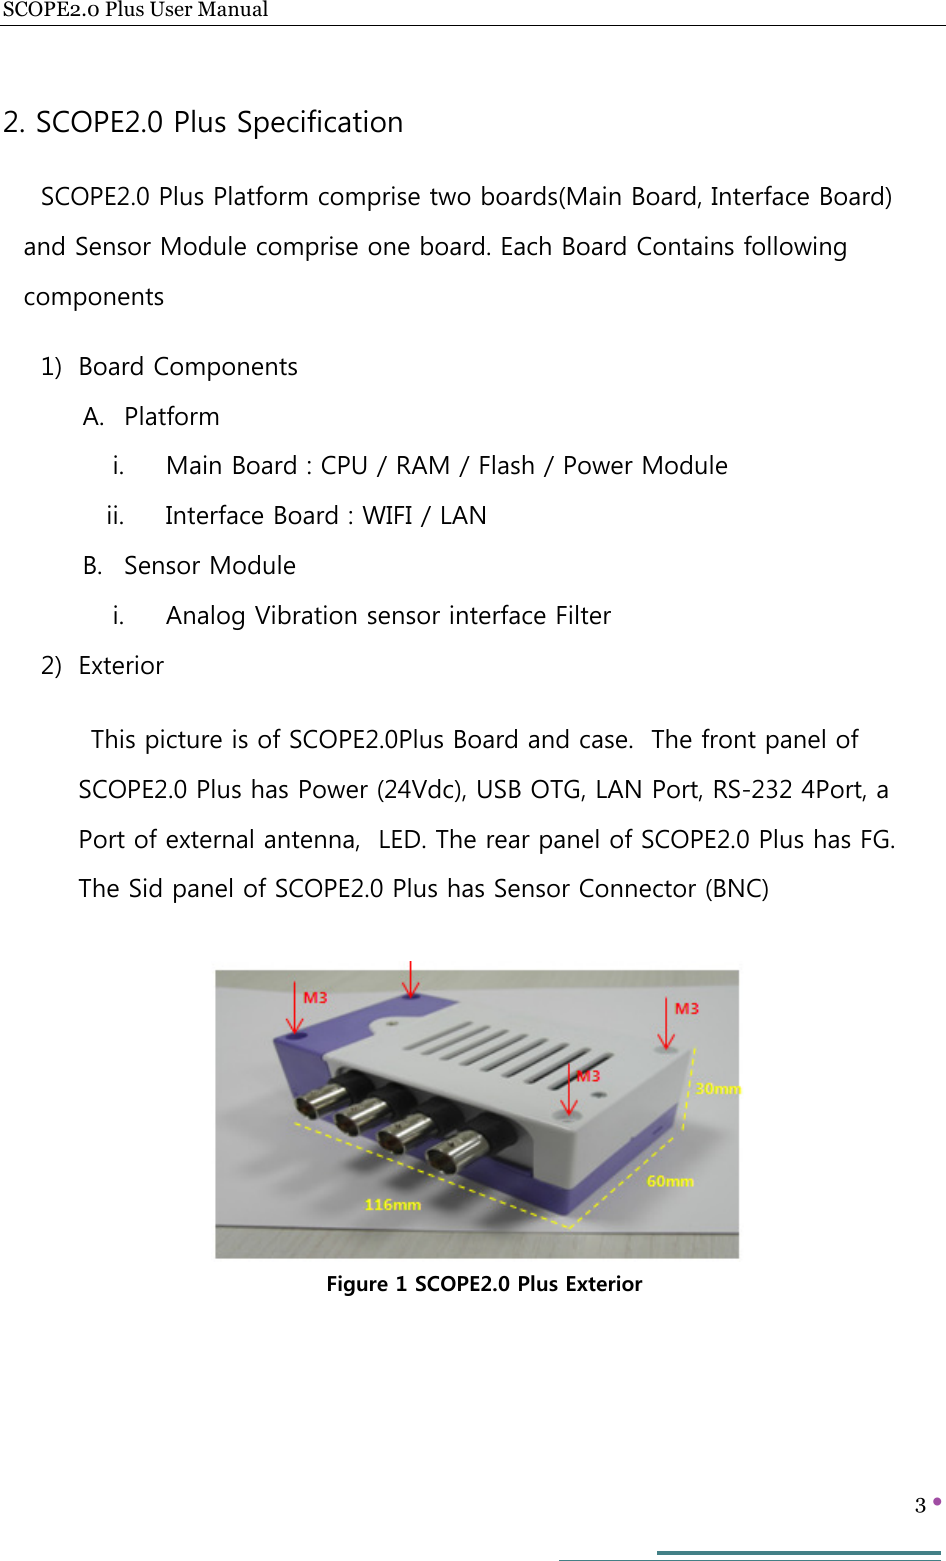 SCOPE2.0 Plus User Manual   3     2. SCOPE2.0 Plus Specification SCOPE2.0 Plus Platform comprise two boards(Main Board, Interface Board) and Sensor Module comprise one board. Each Board Contains following components 1) Board Components A. Platform i. Main Board : CPU / RAM / Flash / Power Module ii. Interface Board : WIFI / LAN B. Sensor Module i. Analog Vibration sensor interface Filter 2) Exterior This picture is of SCOPE2.0Plus Board and case.  The front panel of SCOPE2.0 Plus has Power (24Vdc), USB OTG, LAN Port, RS-232 4Port, a Port of external antenna,  LED. The rear panel of SCOPE2.0 Plus has FG. The Sid panel of SCOPE2.0 Plus has Sensor Connector (BNC)        Figure 1 SCOPE2.0 Plus Exterior 